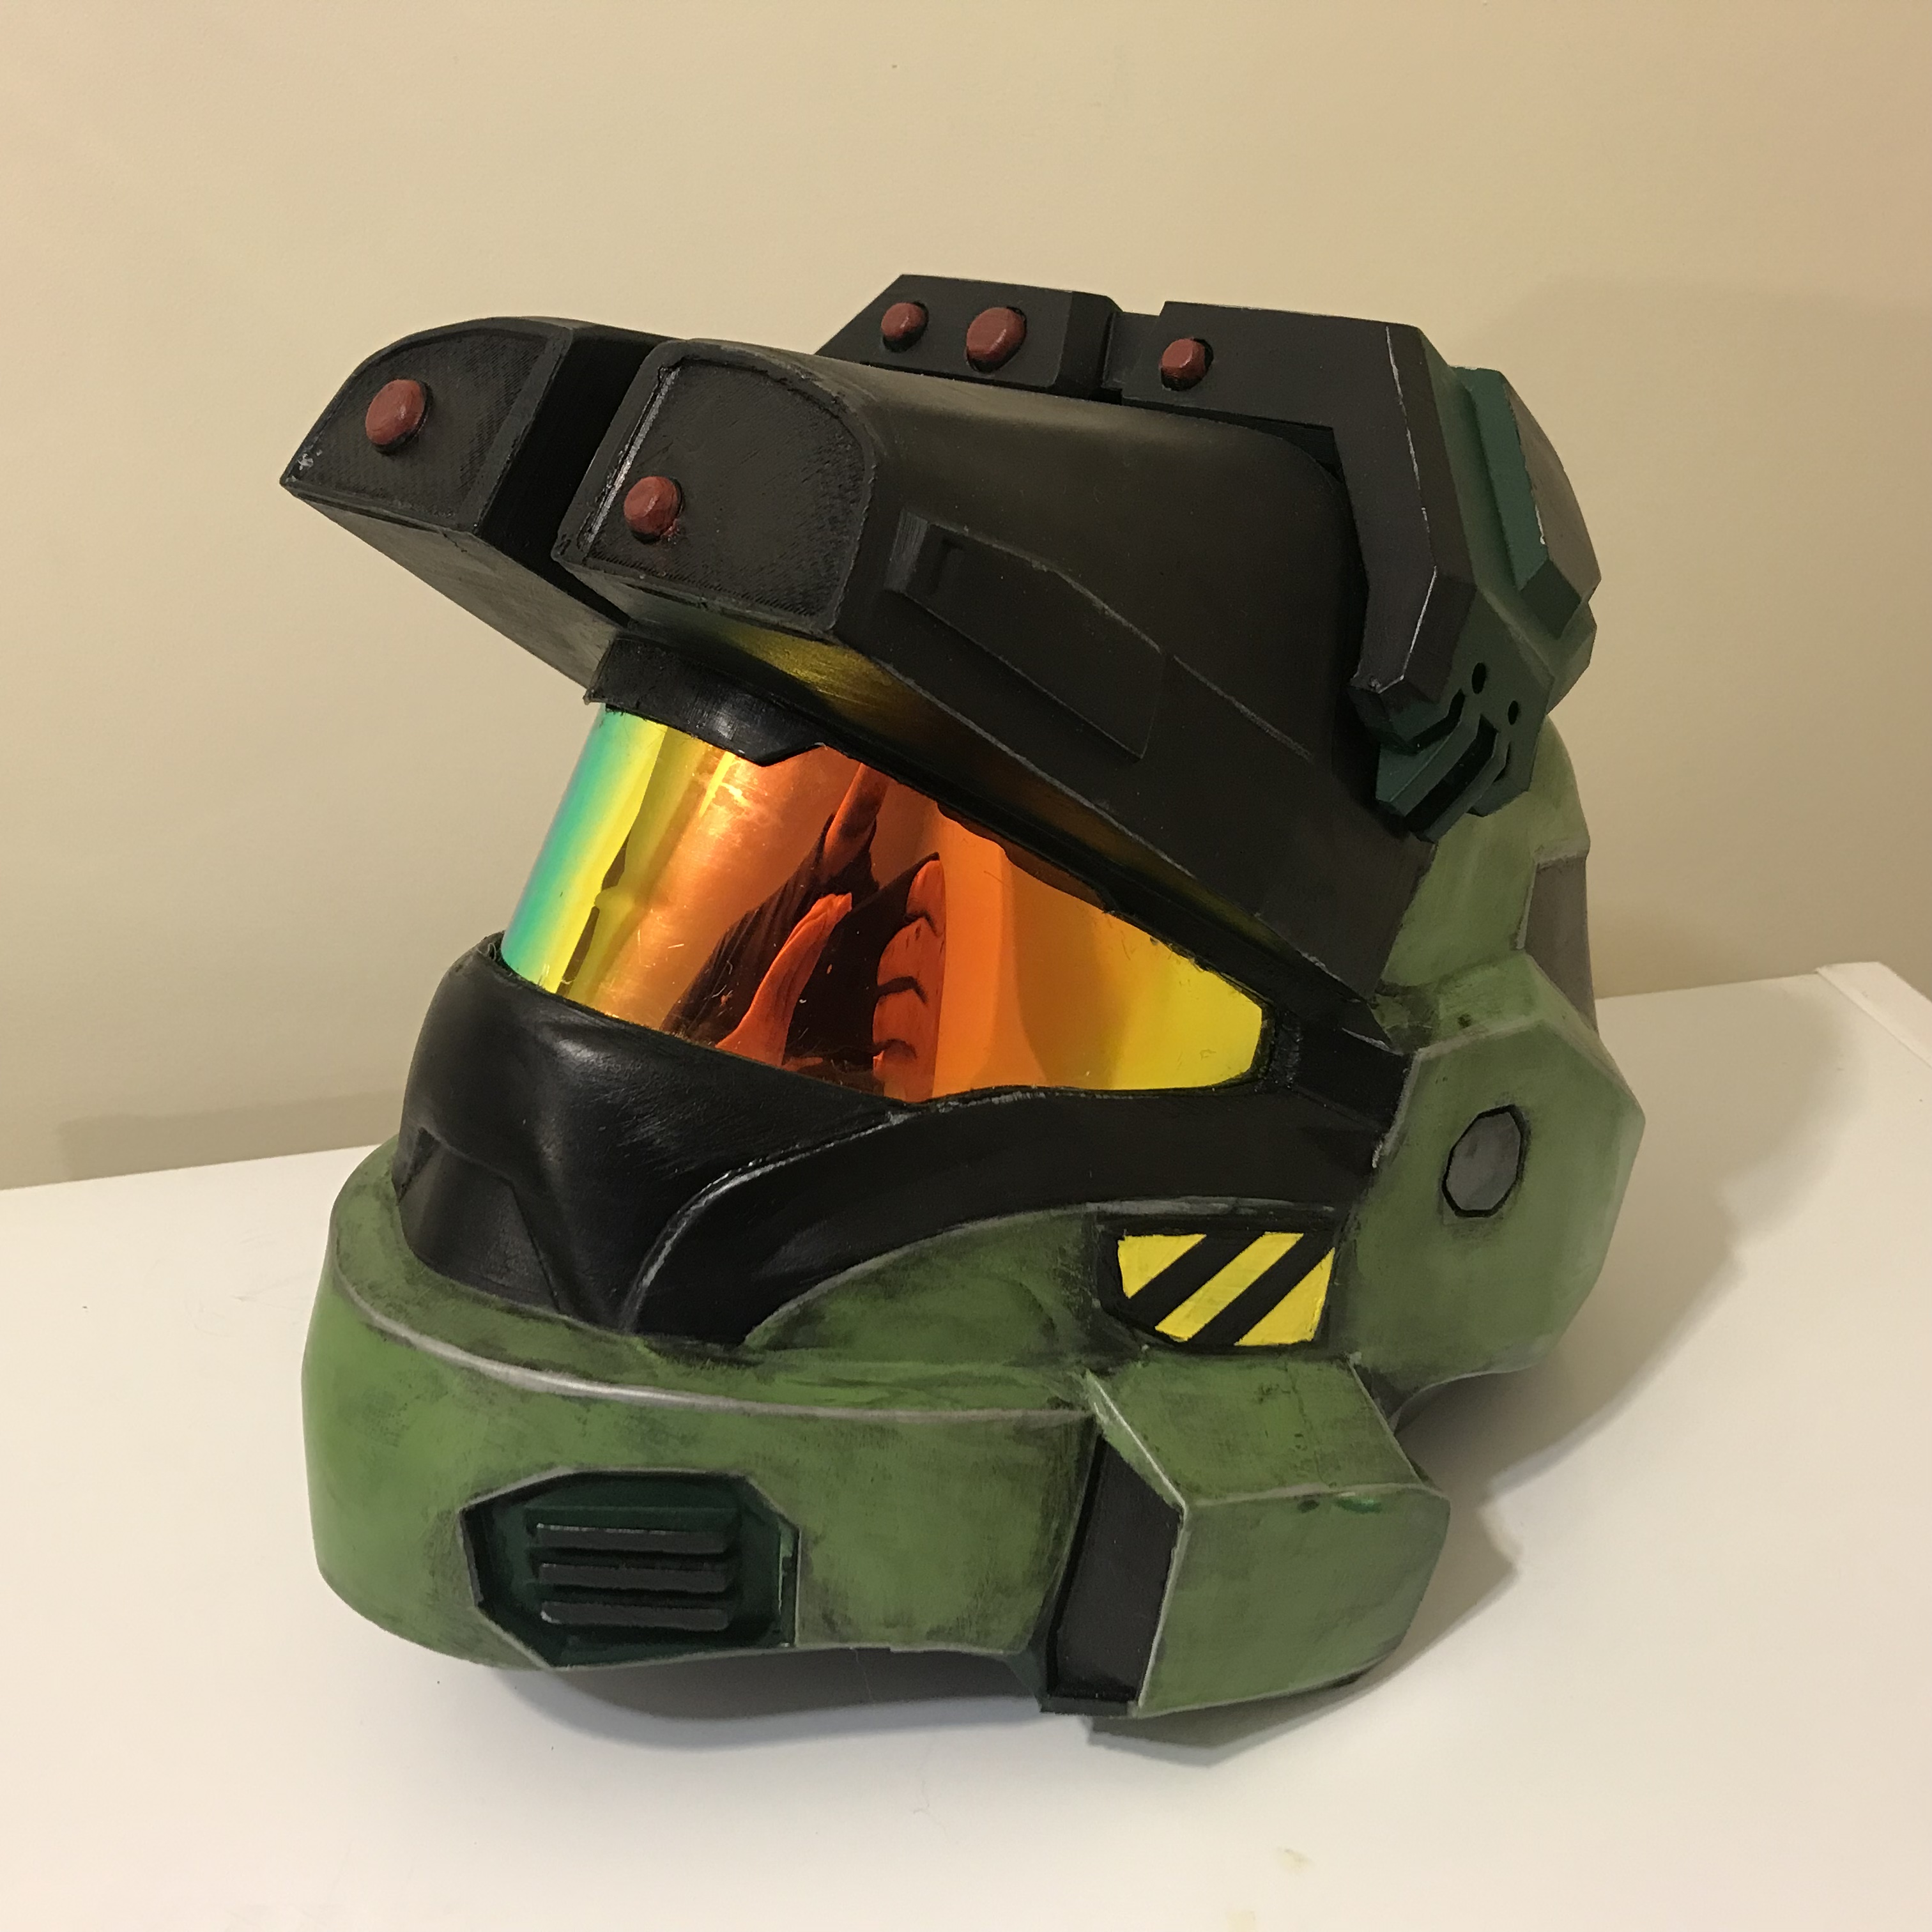 Angled profile | Halo Costume and Prop Maker Community - 405th